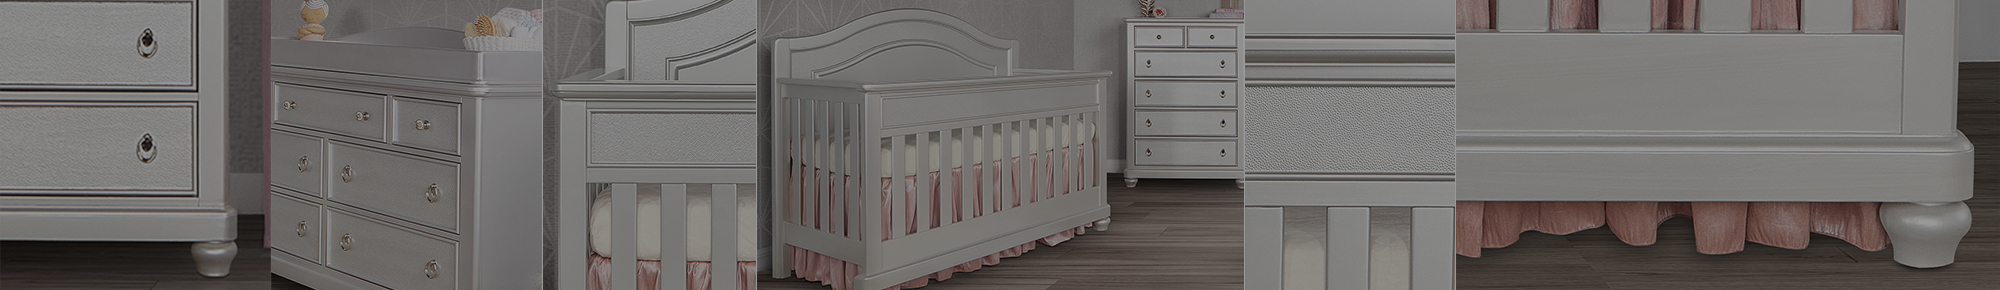 glam baby cribs